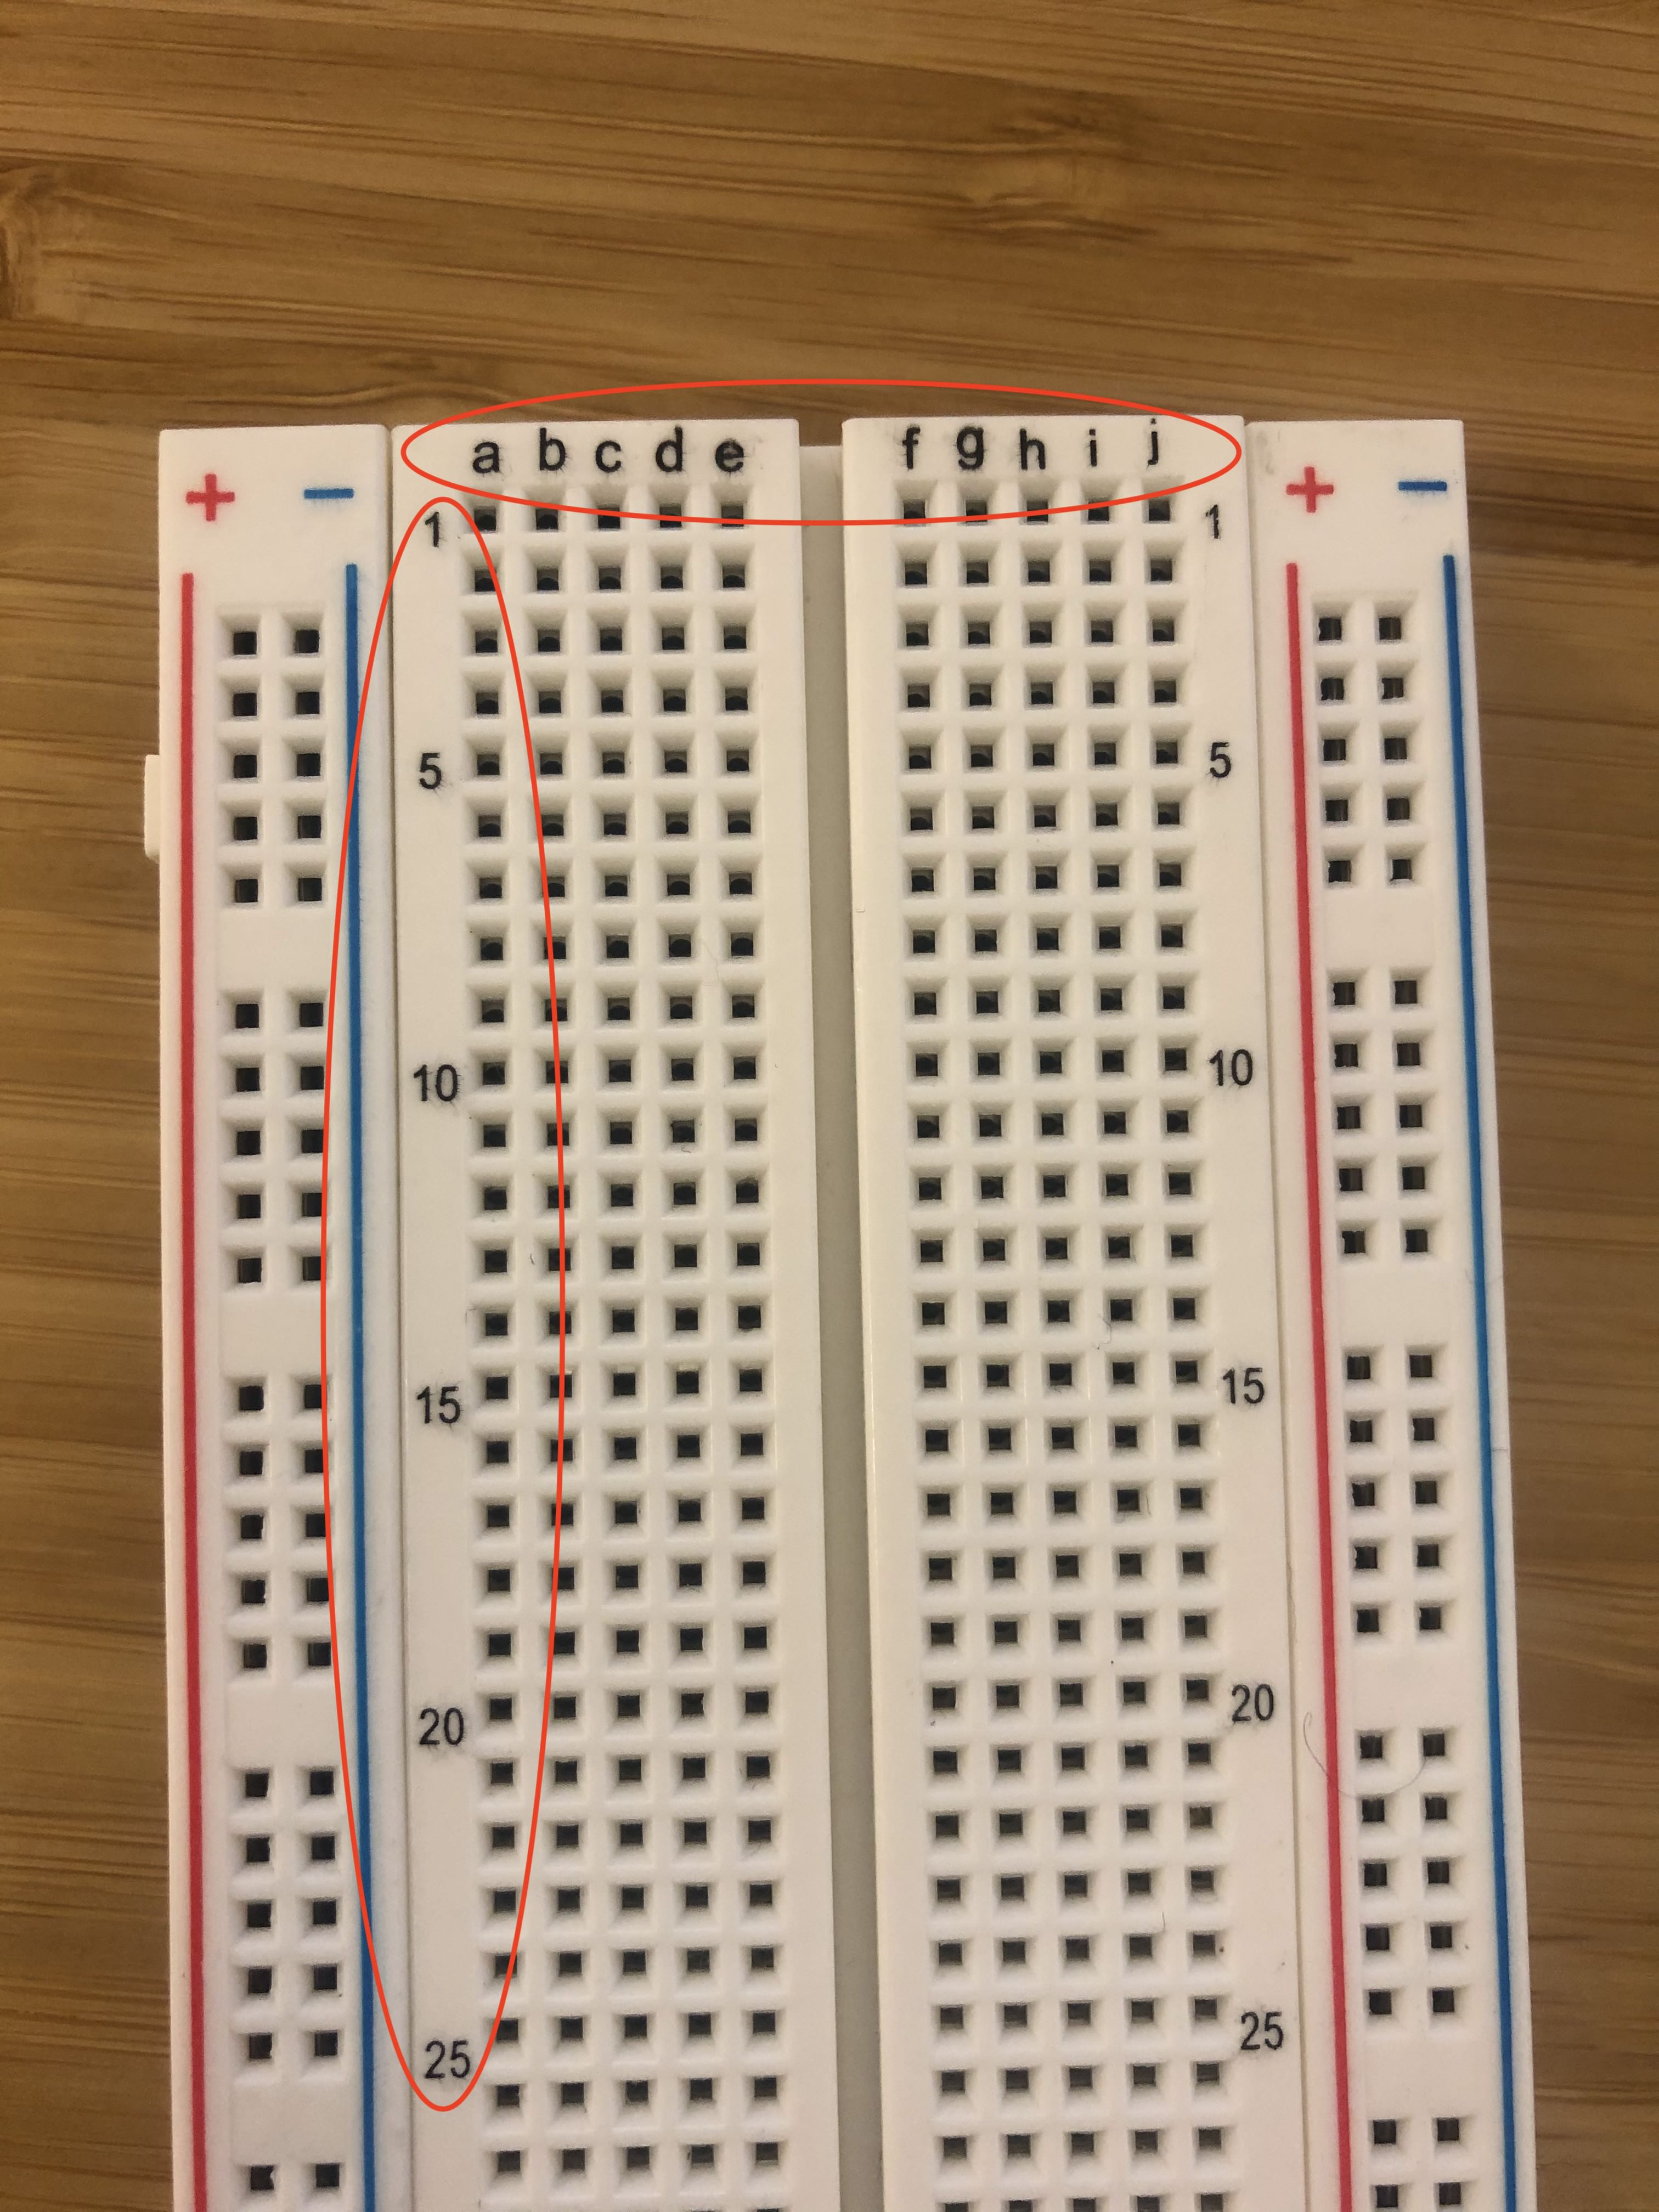 A photo of a breadboard with circles around the labeled rows and columns